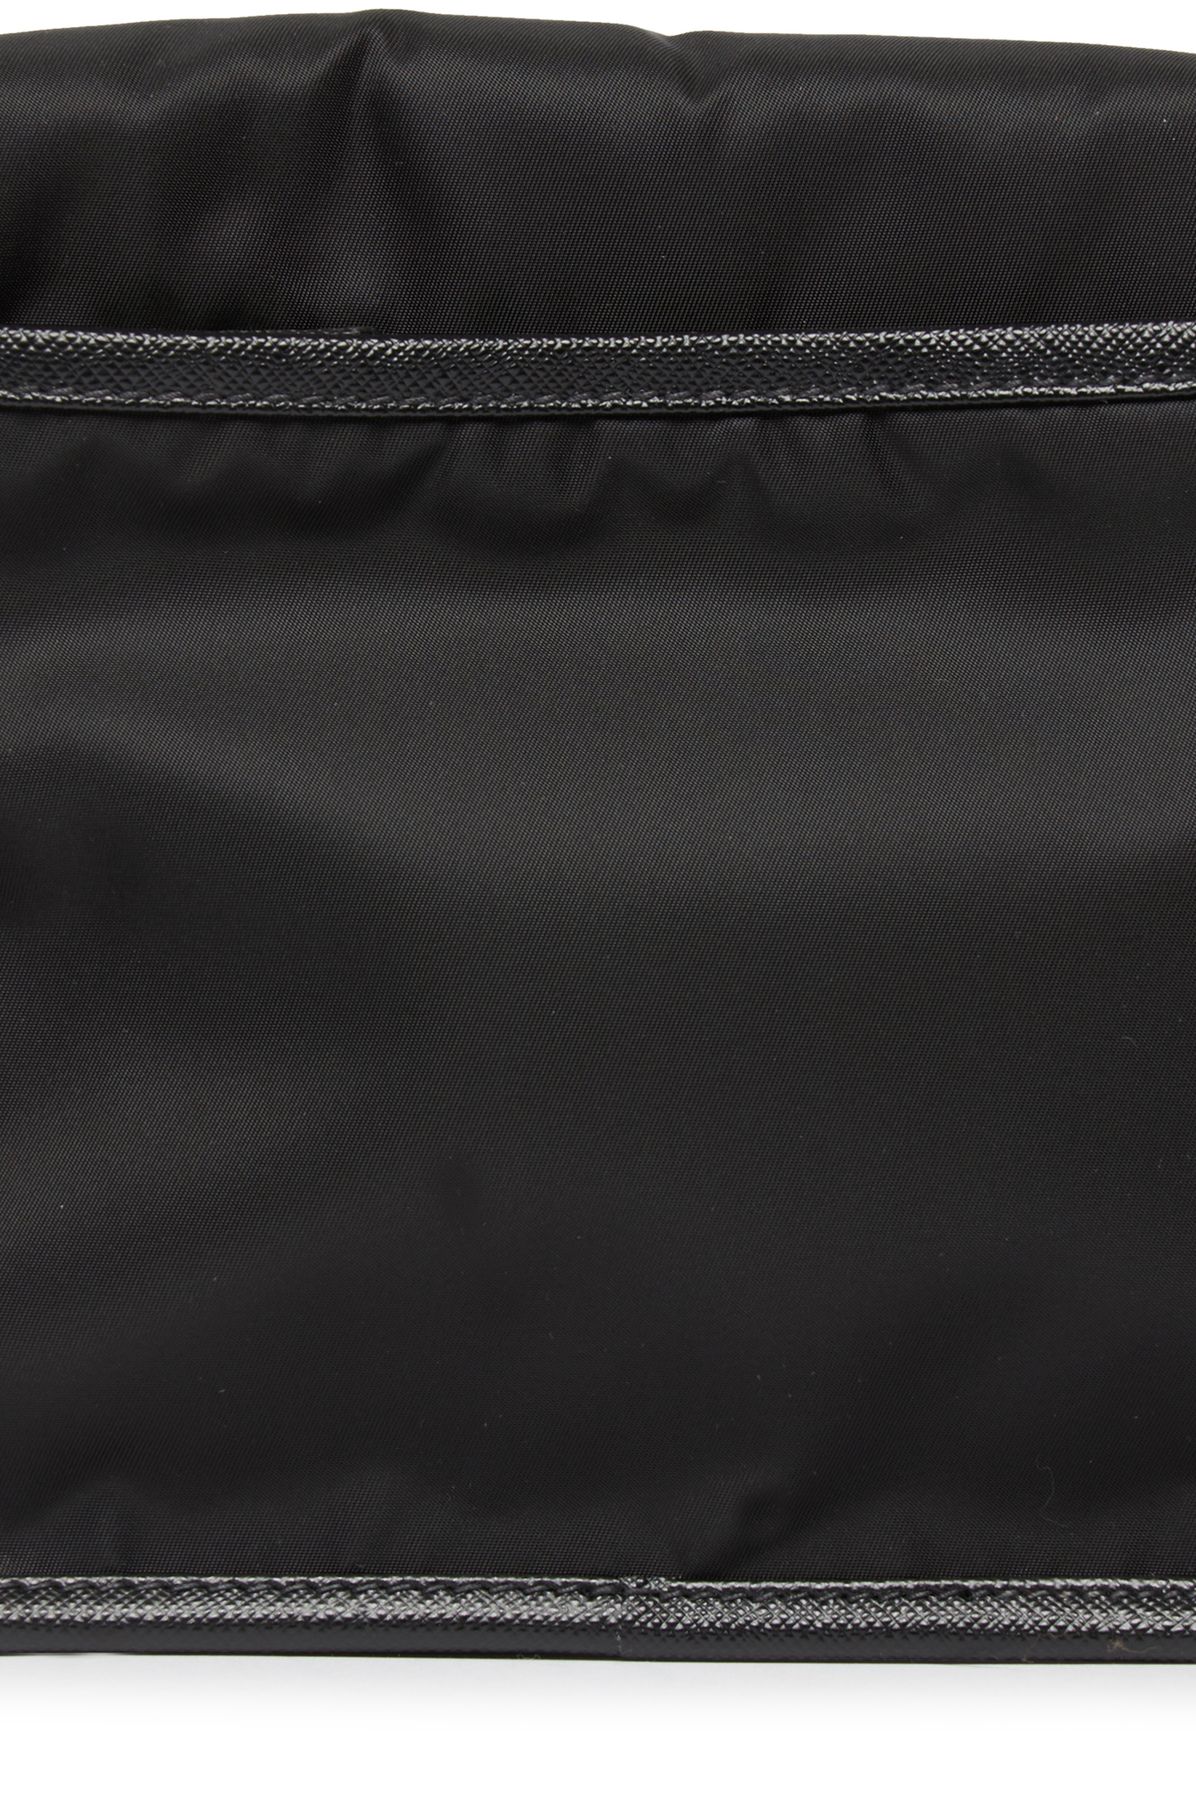 Prada Shoulder bag in Re-nylon and leather